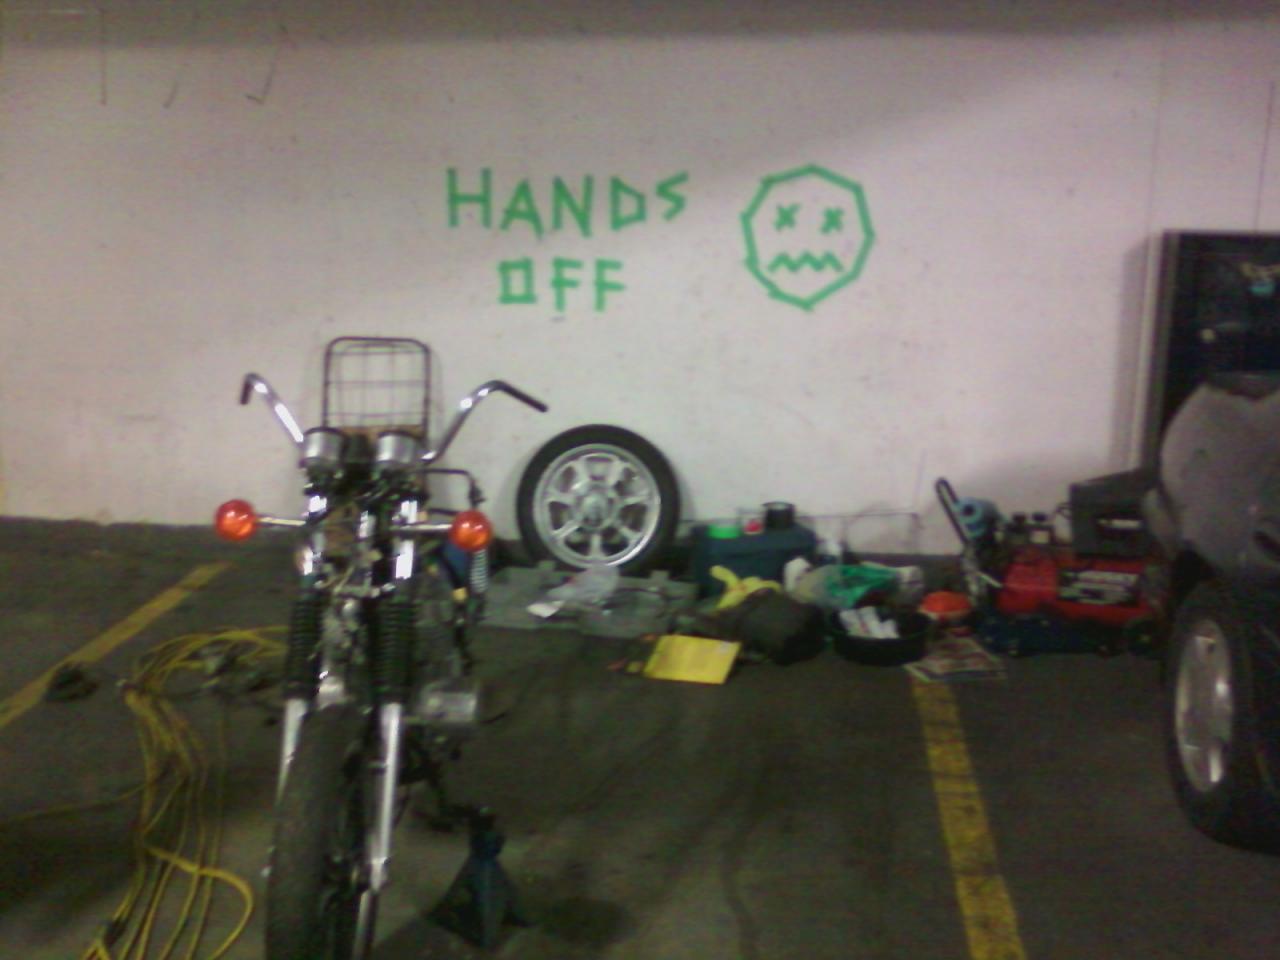 got kind of tired of people touching my stuff... or tired of being paranoid about leaving it out in a public garage so i decided to leave up a scare c